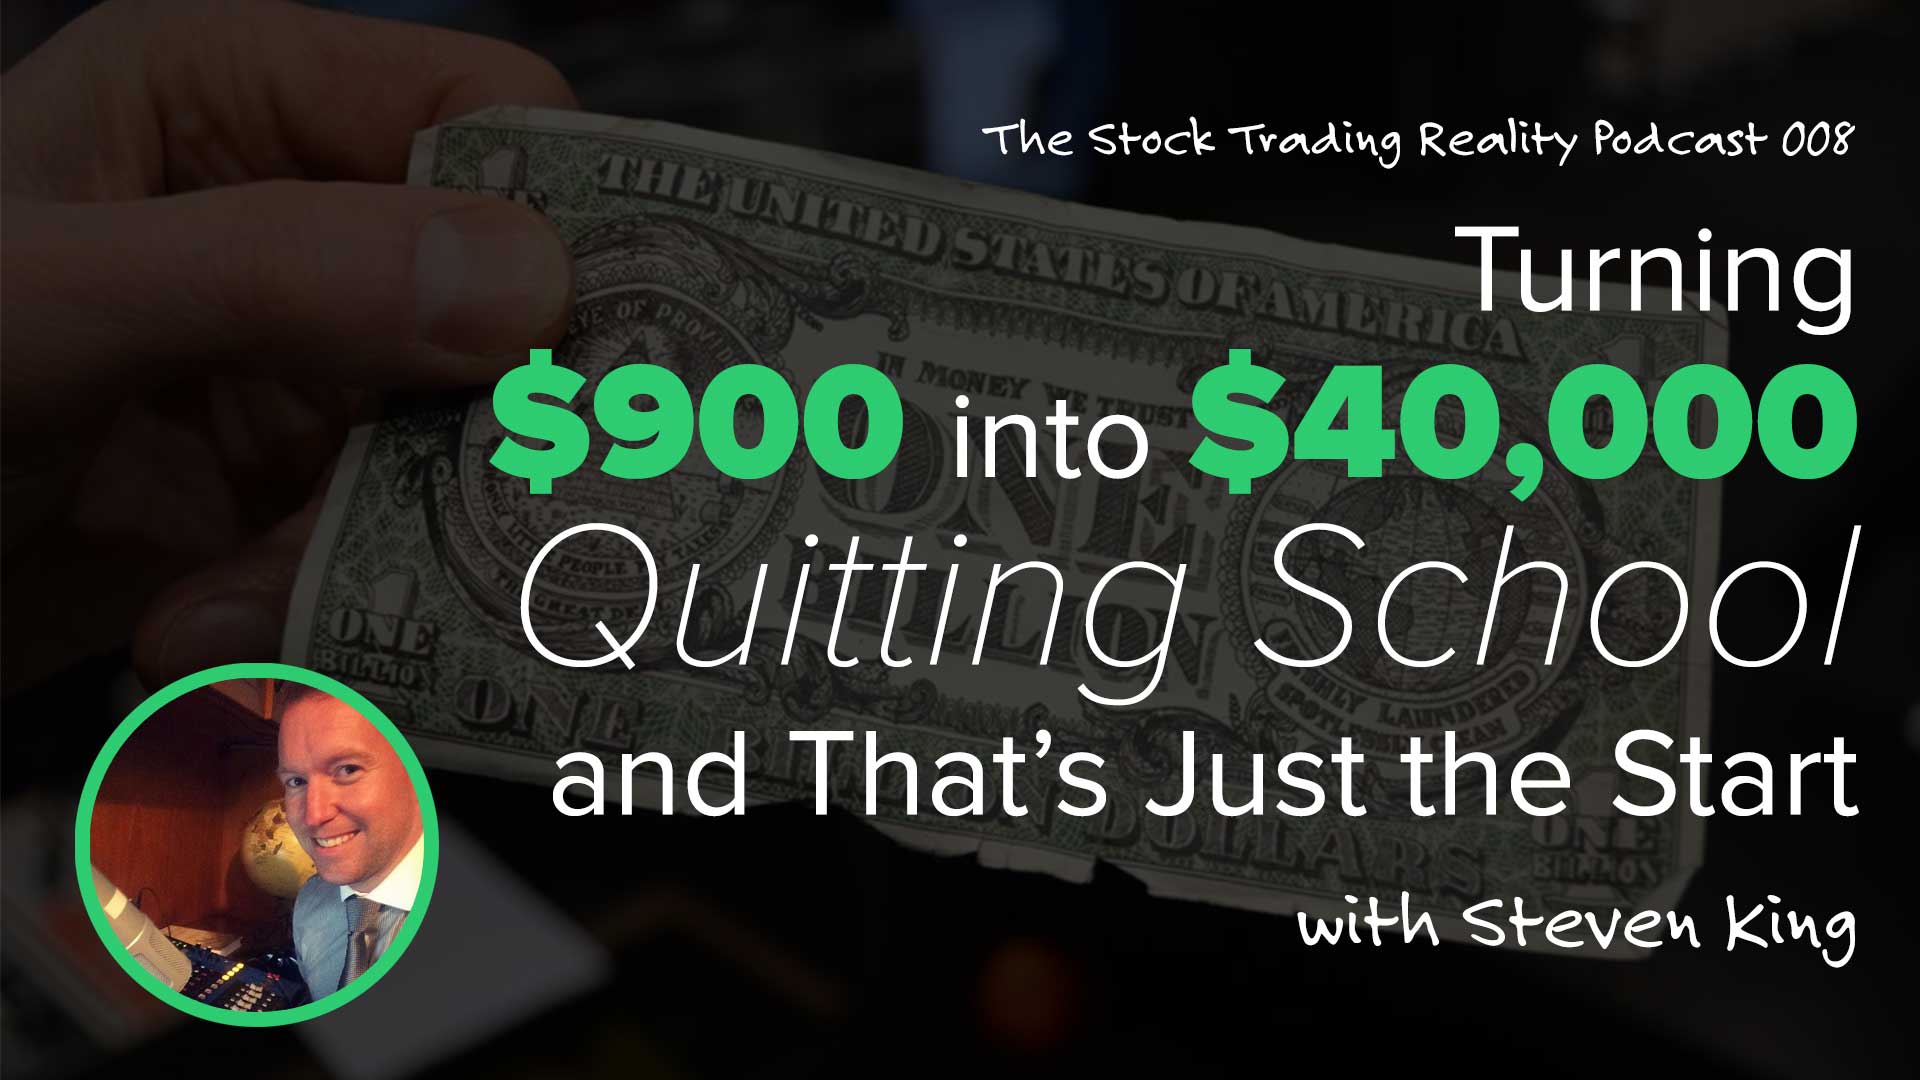 STR 008: Turning $900 into $40,000, Quitting School, and that's Just the Start‏